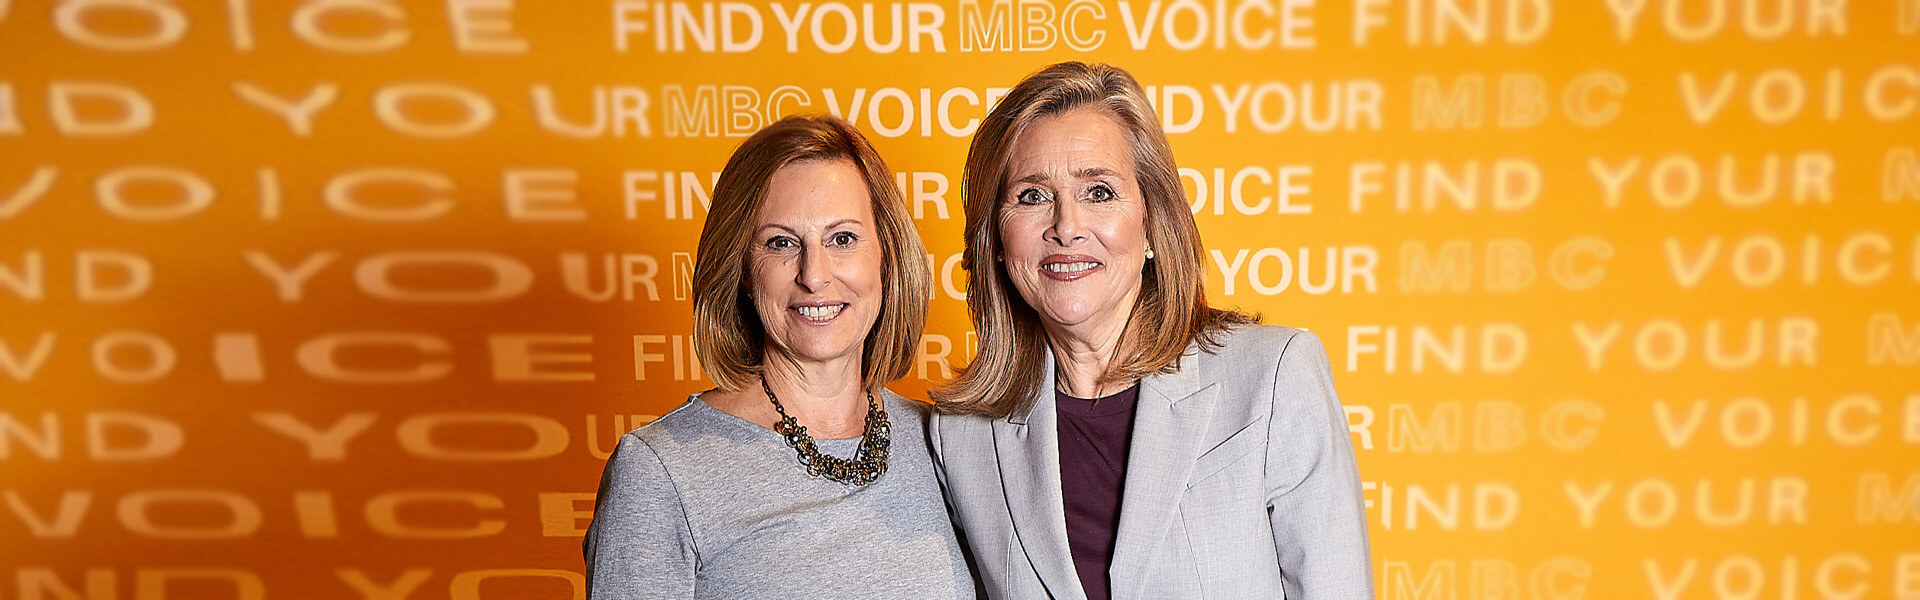 Meredith Vieira Honors Her Grandmother by Helping People Living with Metastatic Breast Cancer Find Their Voices